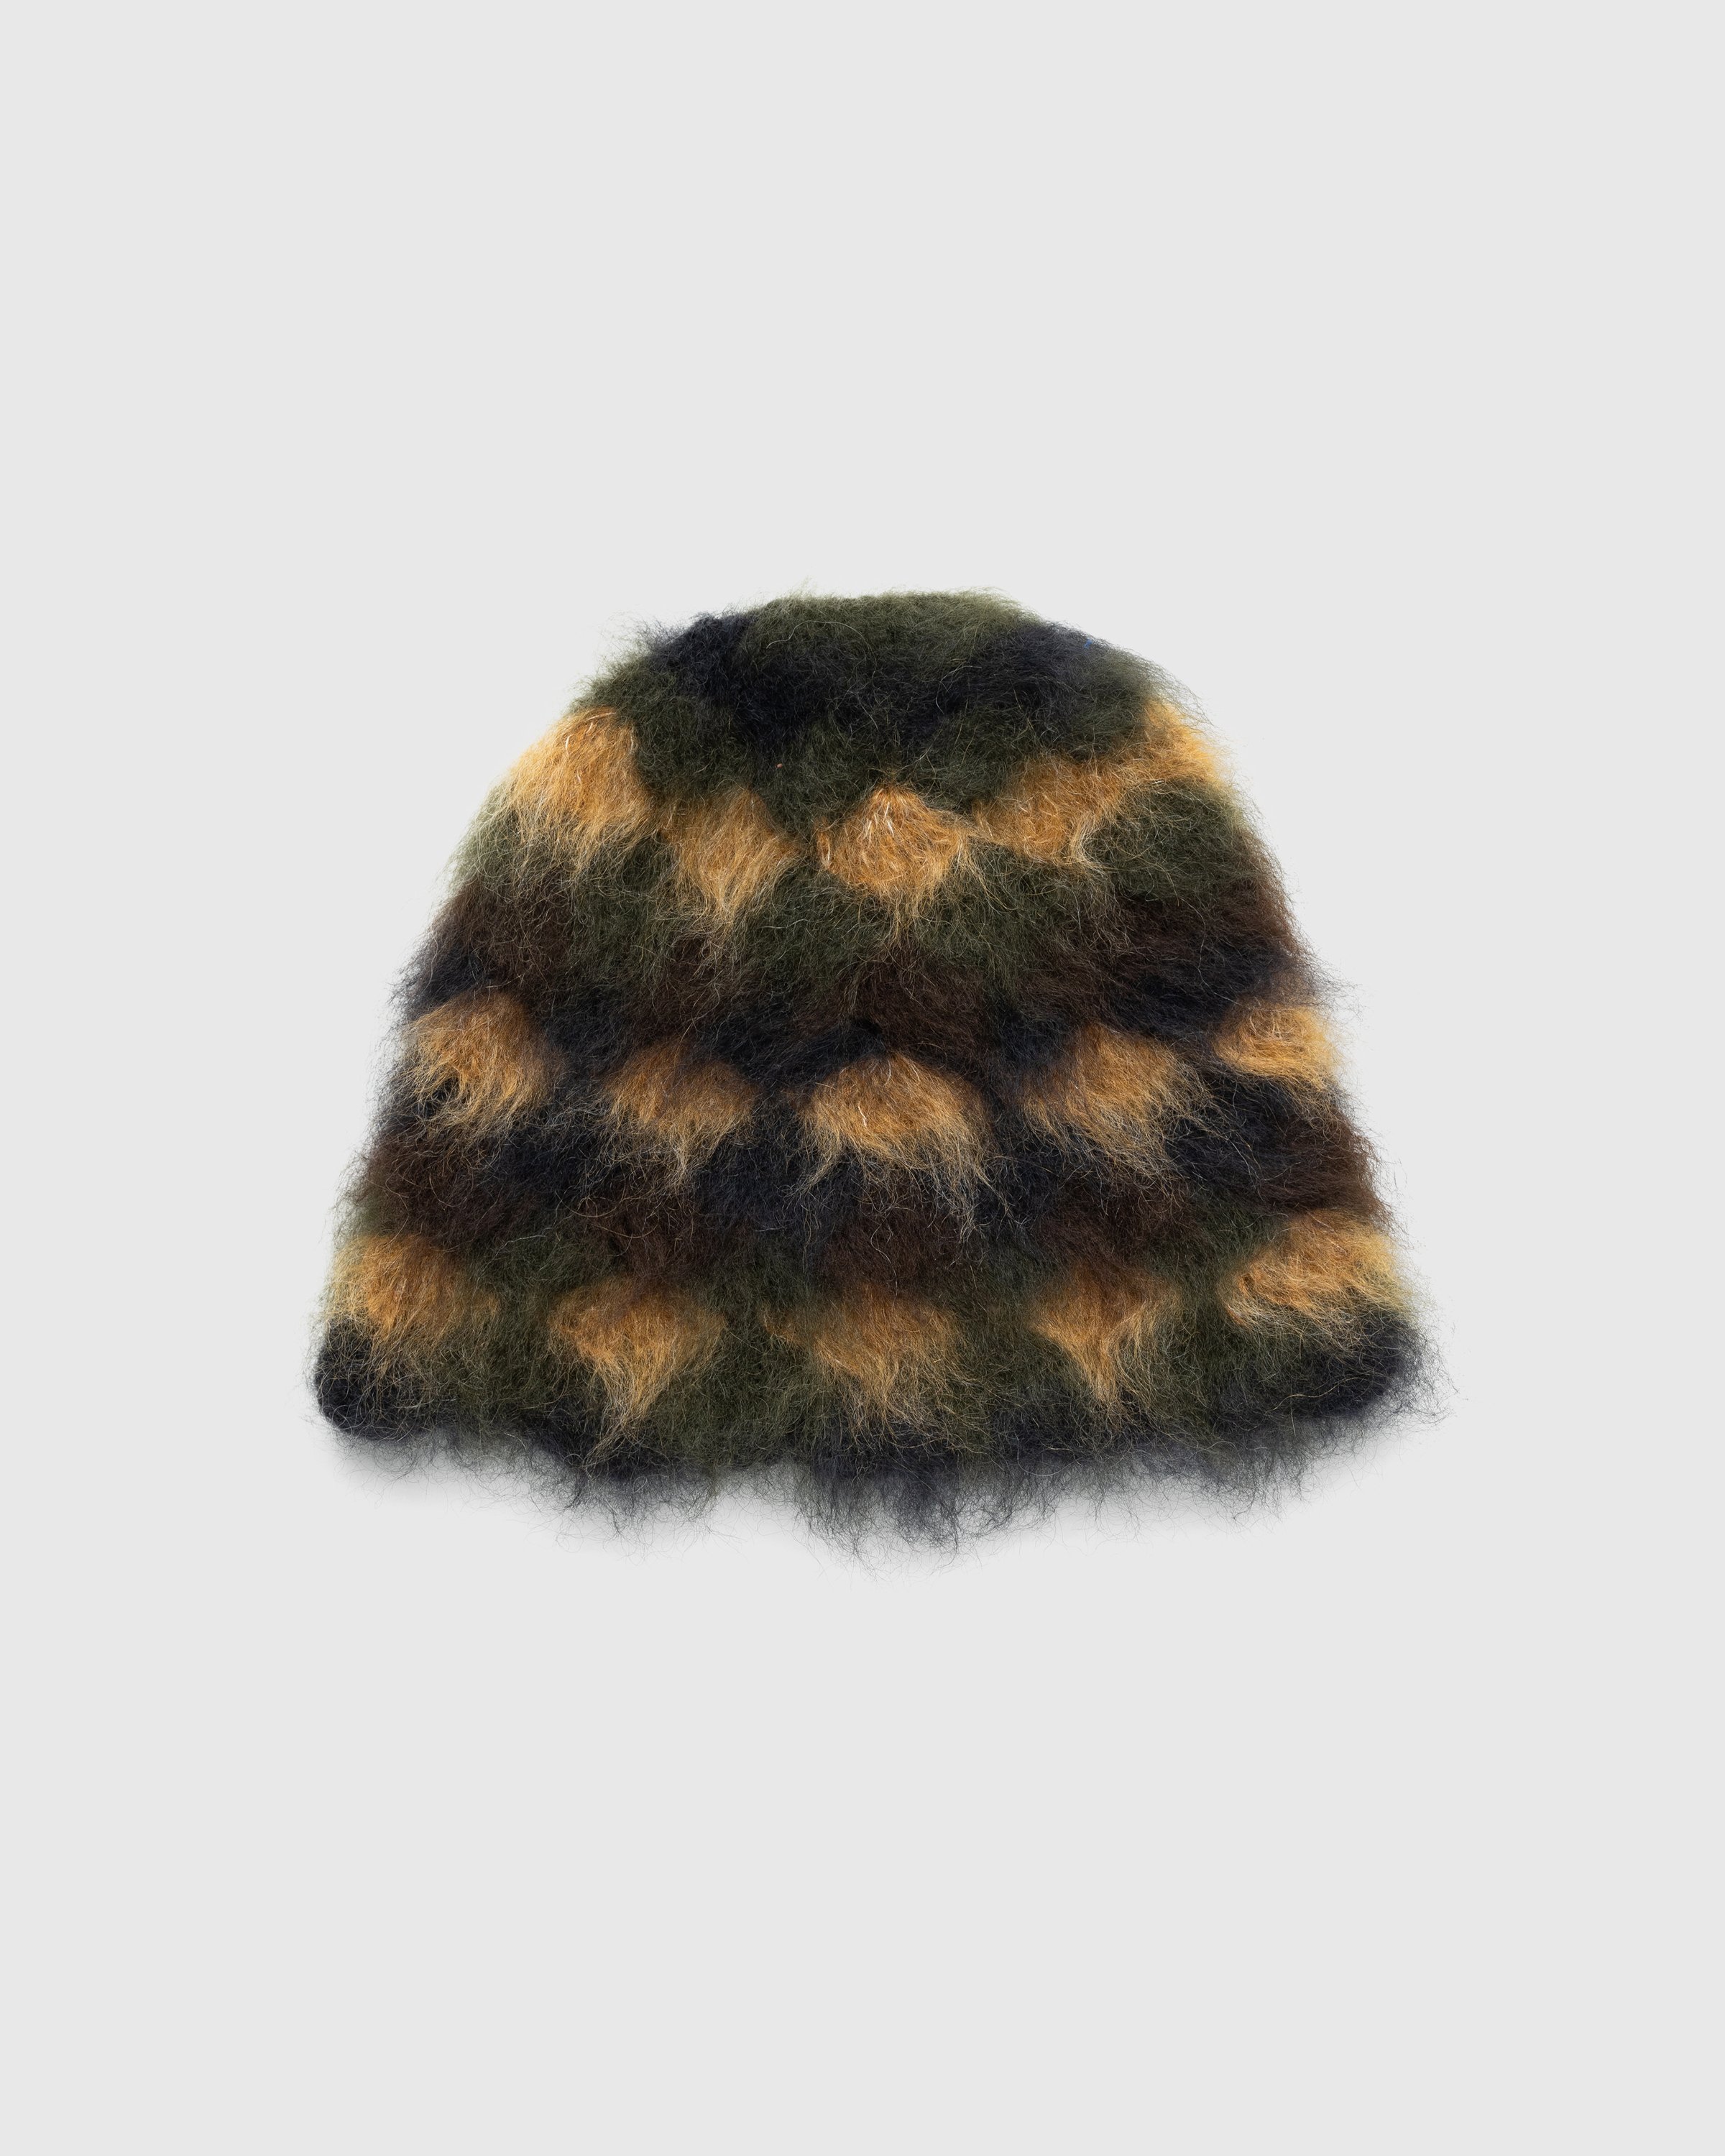 SSU - Brushed Mohair Seashell Bucket Hat Forest Camo - Accessories - Green - Image 1